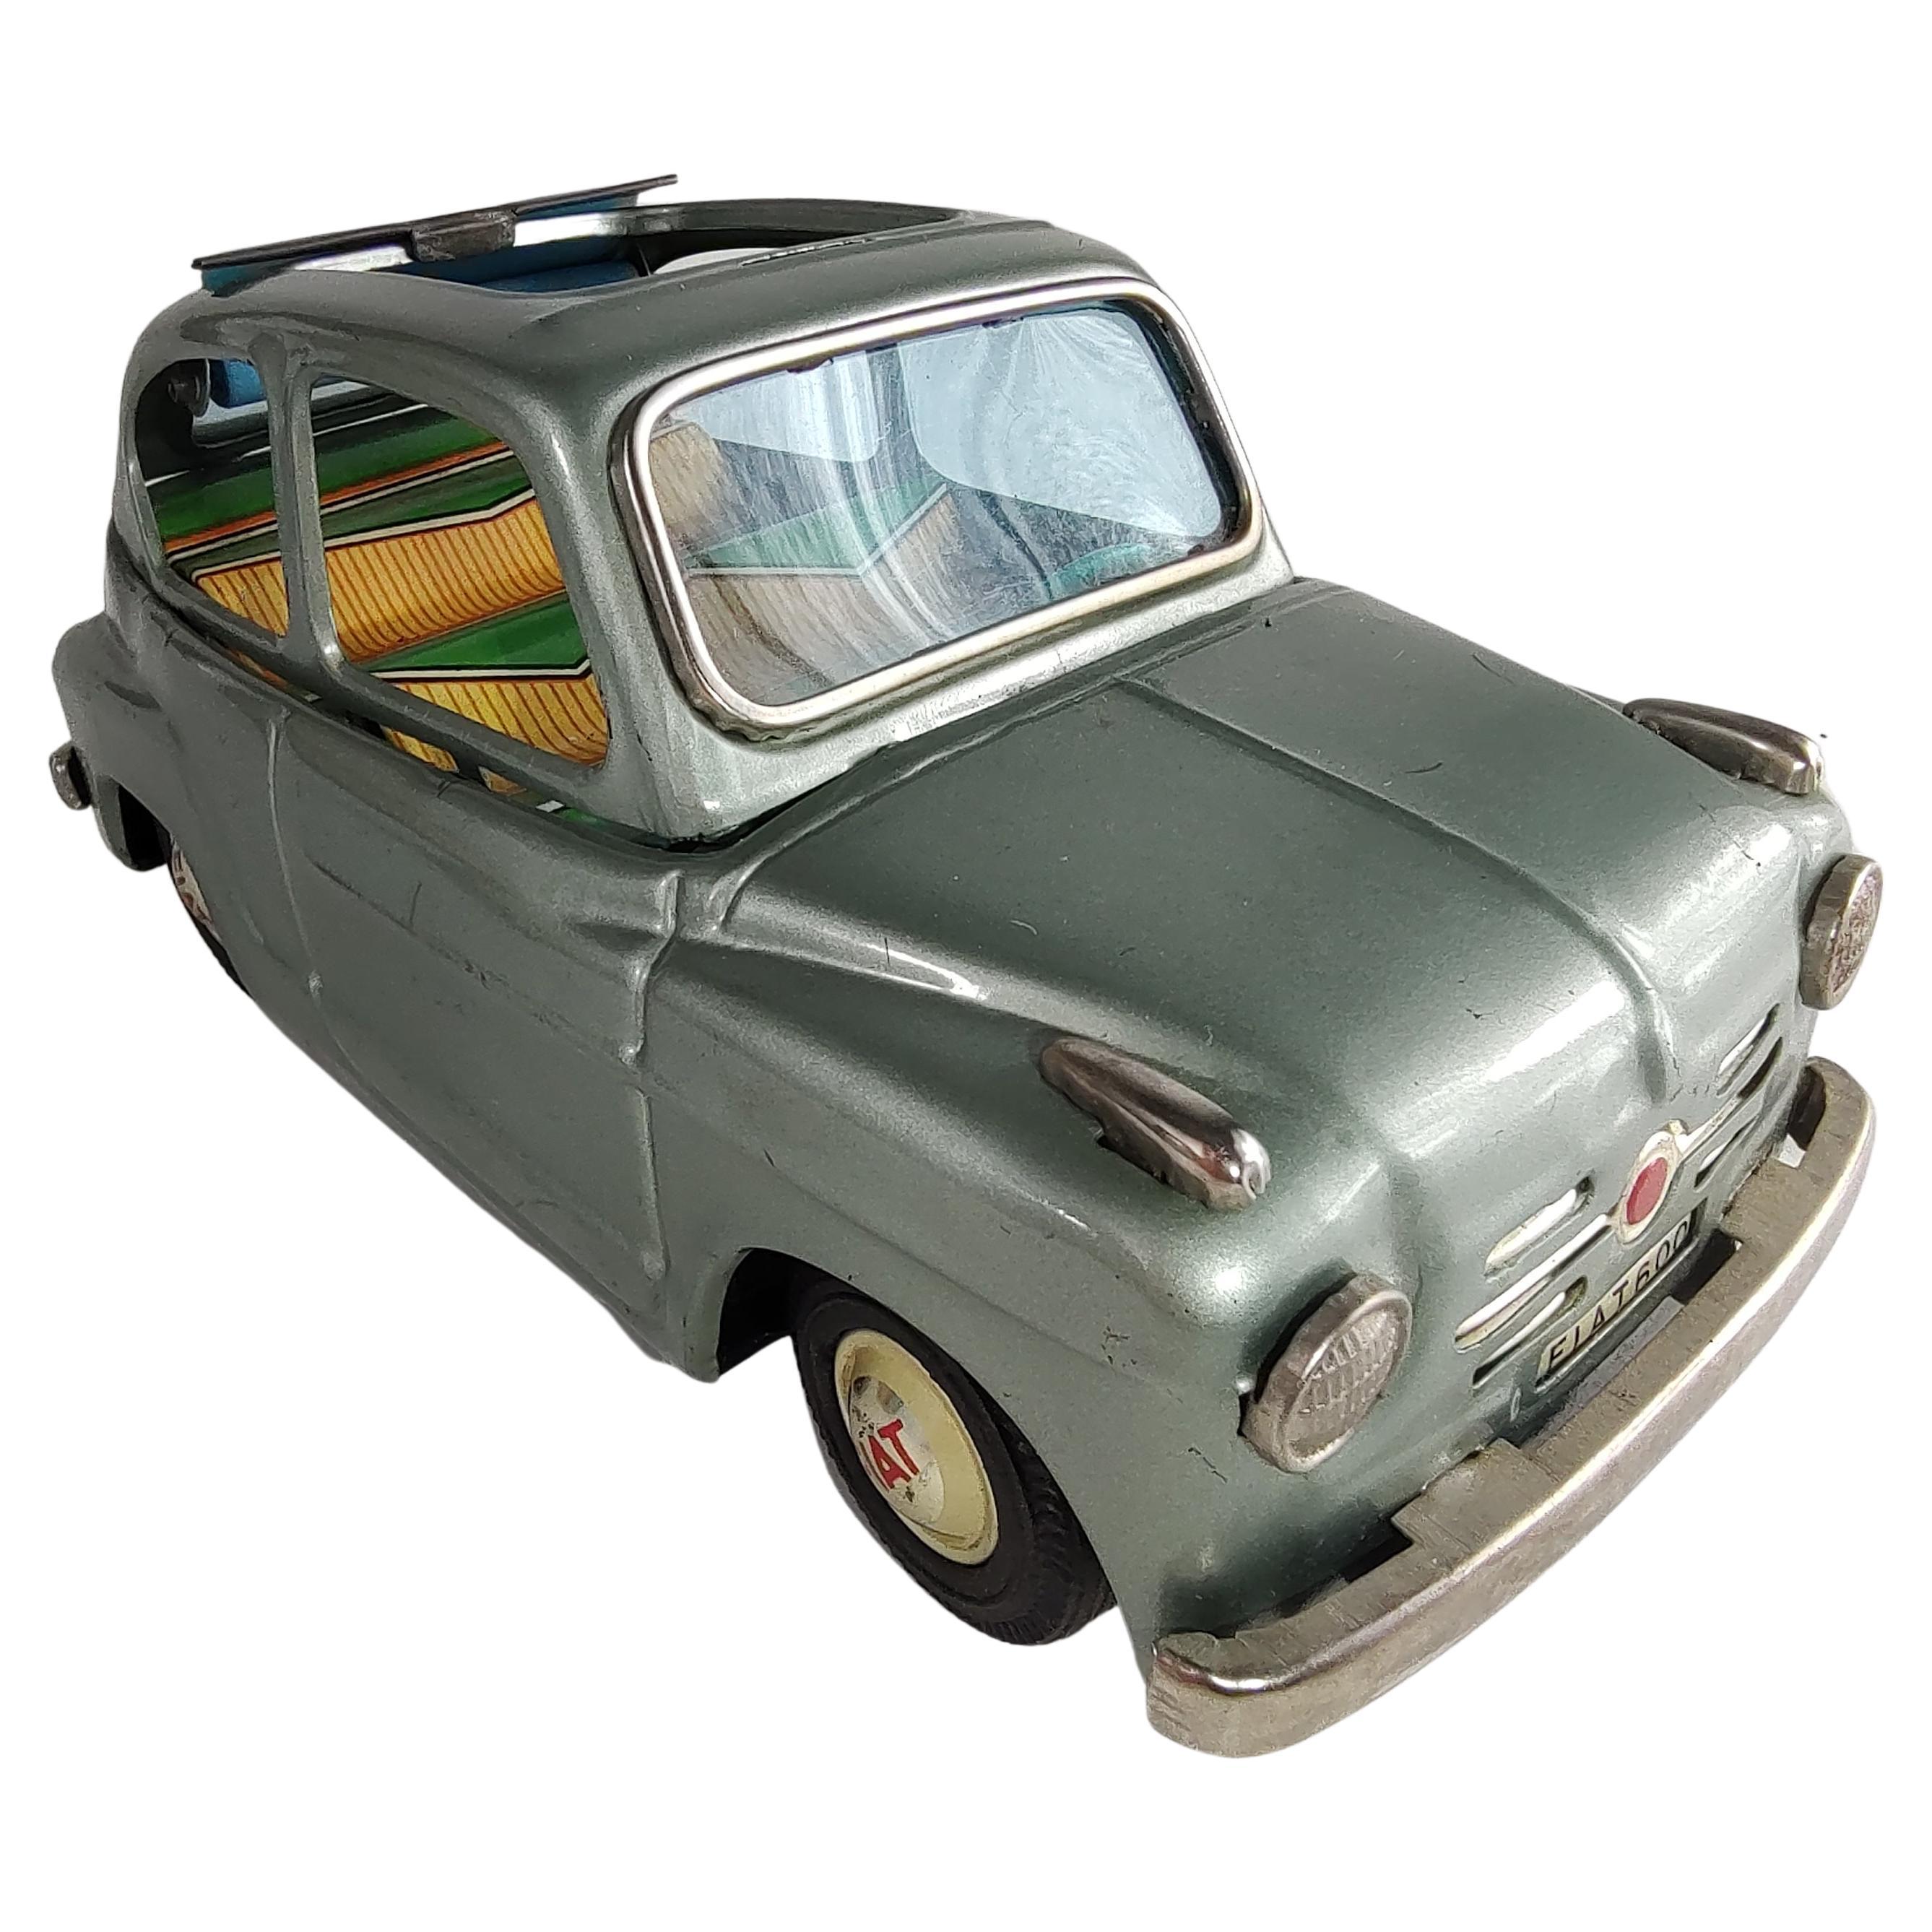 Midcentury Friction Tin Litho Soft Top Toy Car Fiat 600 by Bandai Japan In Good Condition For Sale In Port Jervis, NY